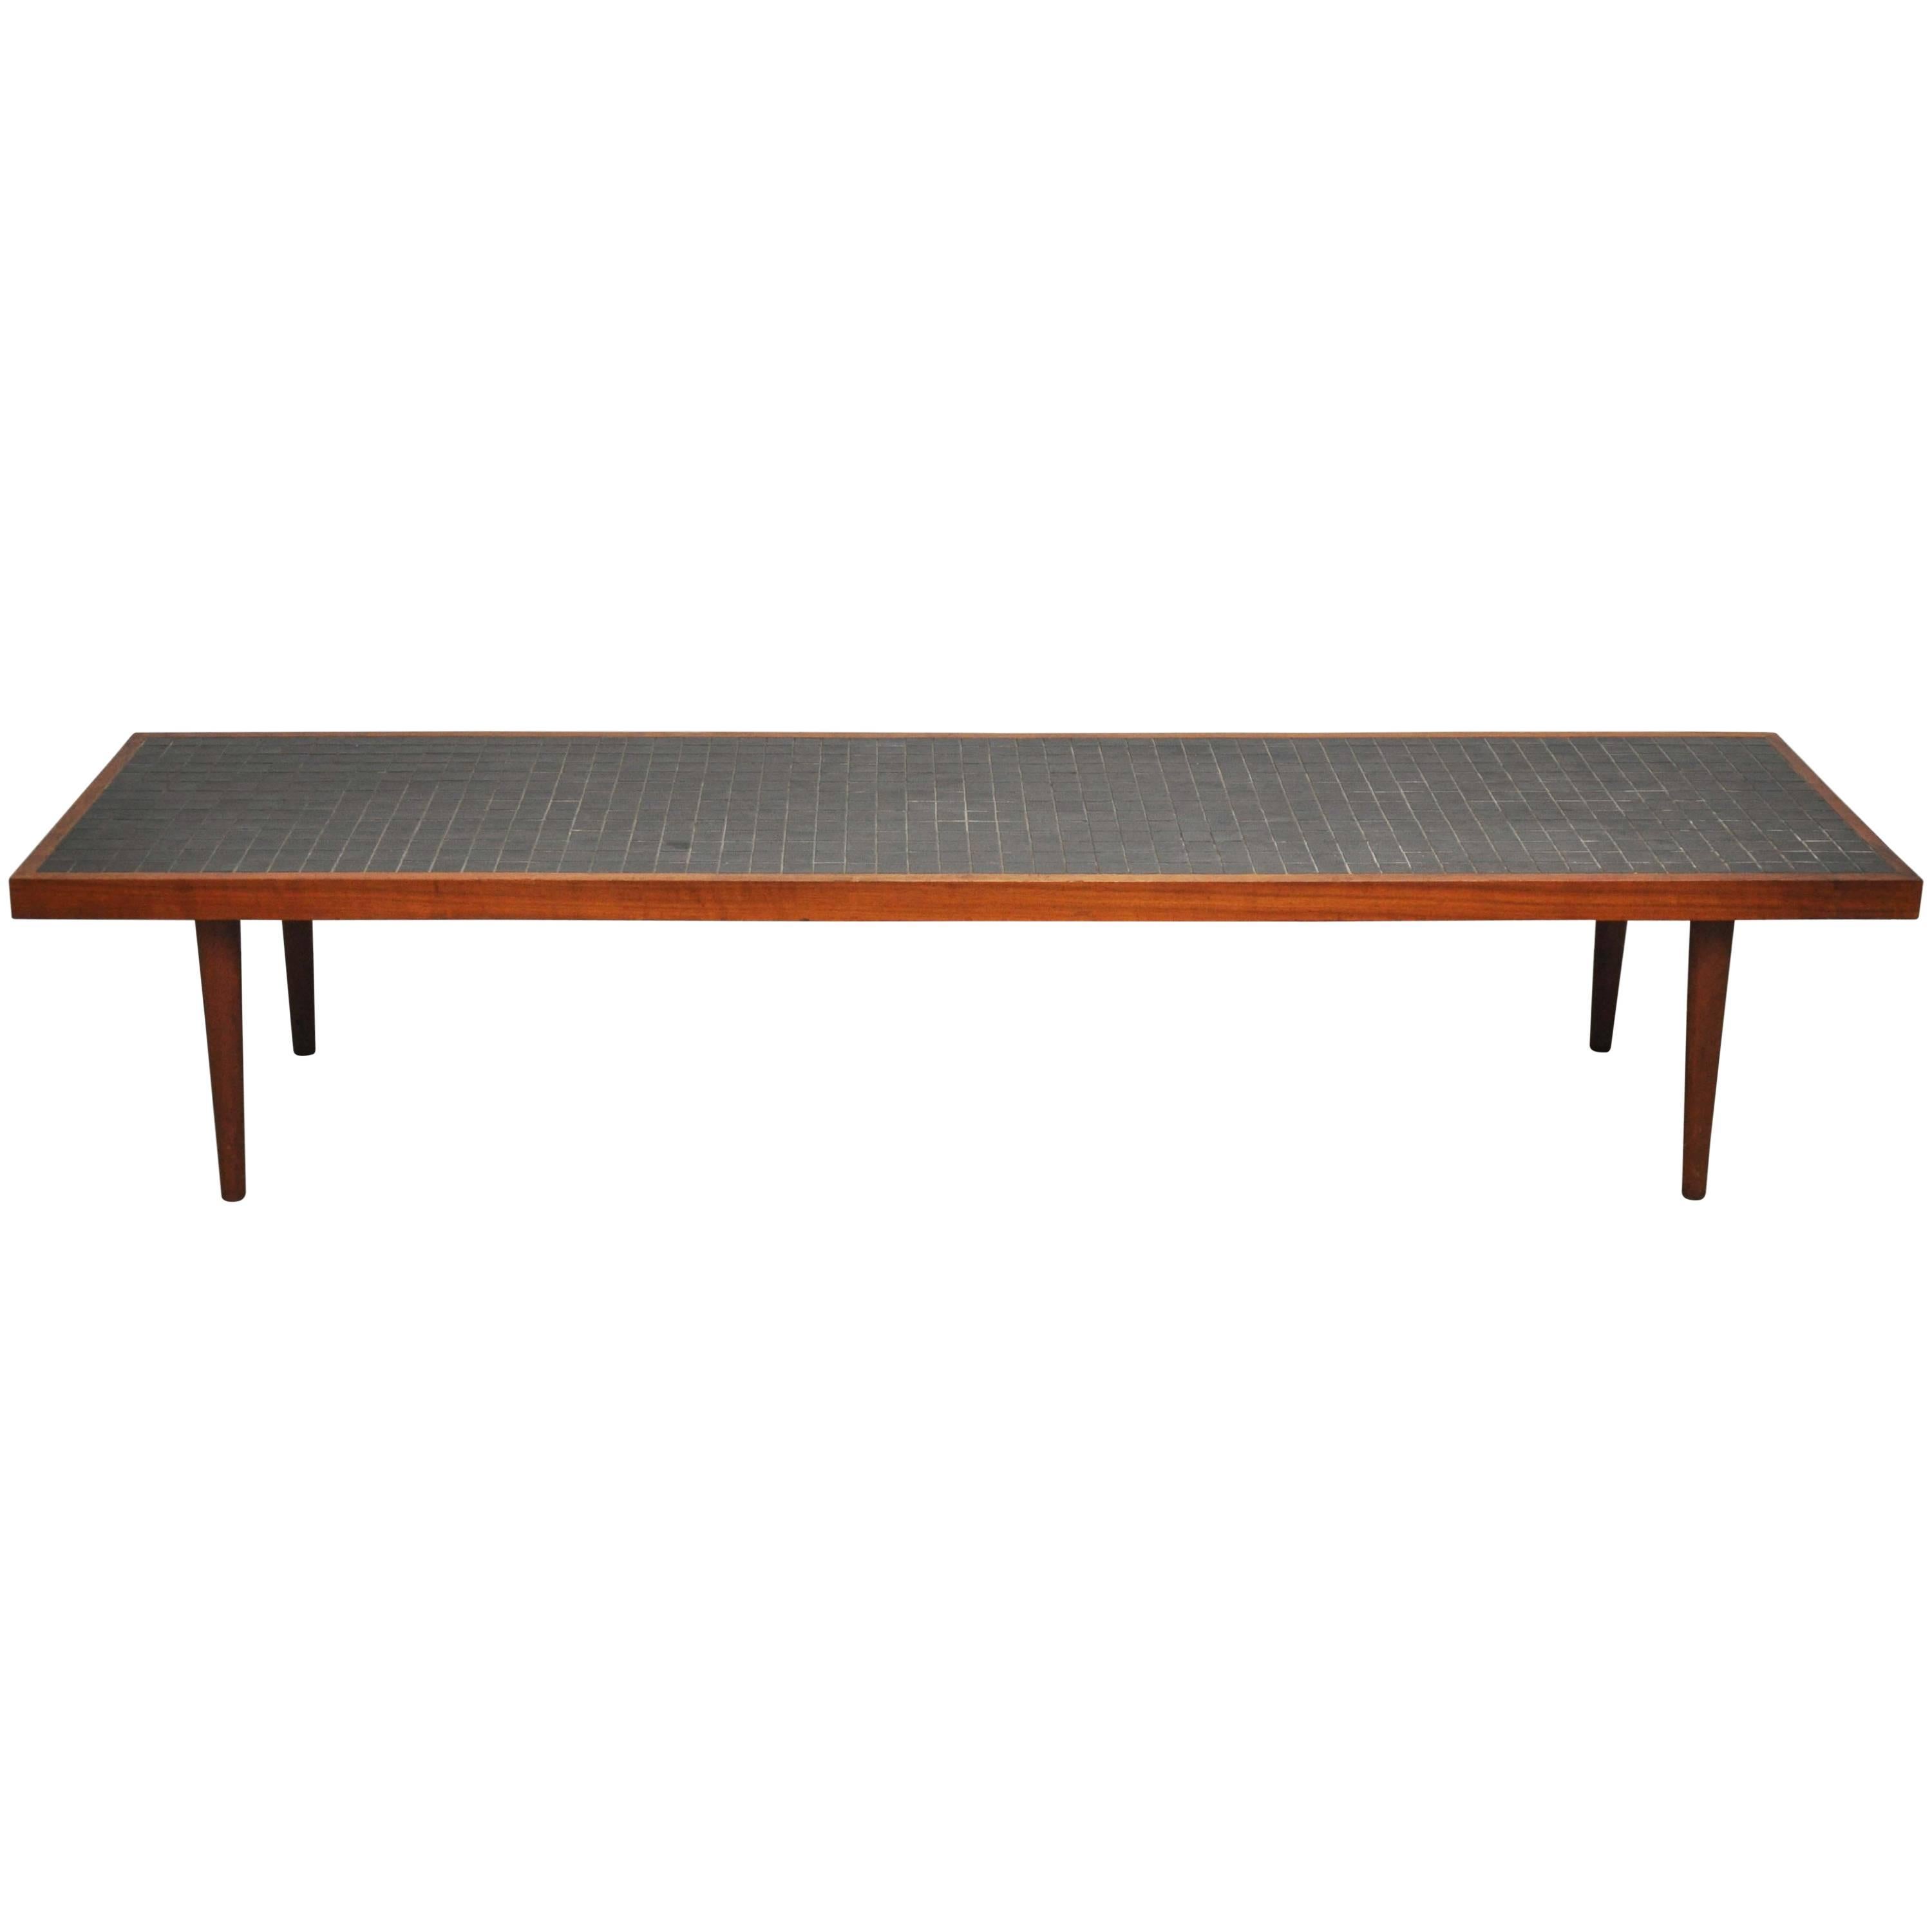 Coffee Table by Gordon and Jane Martz for Marshall Studios